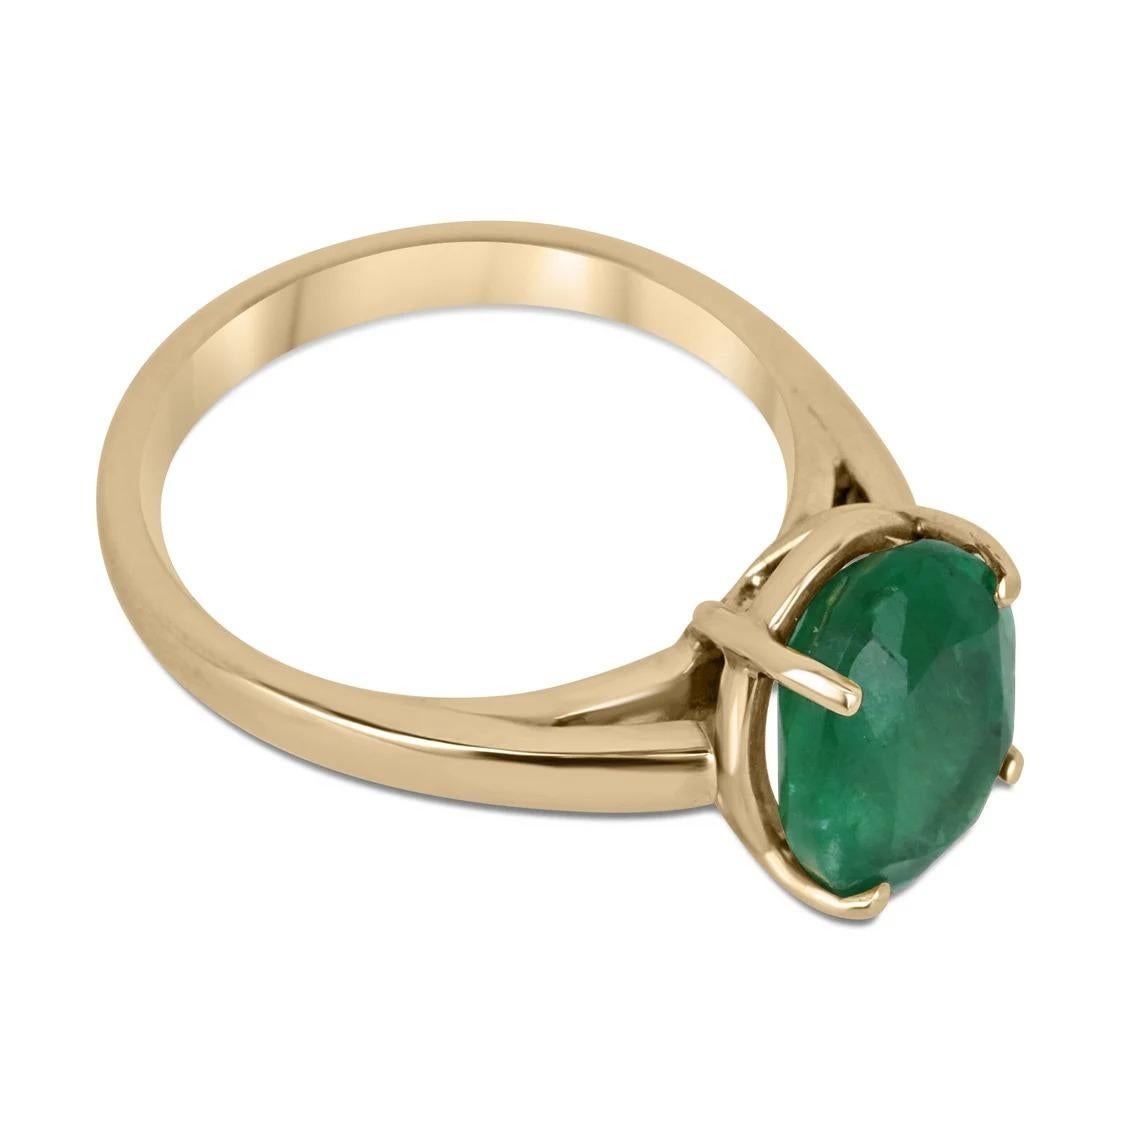 This stunning emerald solitaire ring features a 2.98 carat oval cut emerald with a rich, dark forest green color that is sure to catch the eye. The emerald is set in a classic four-prong setting, which allows for maximum light to enter and enhance